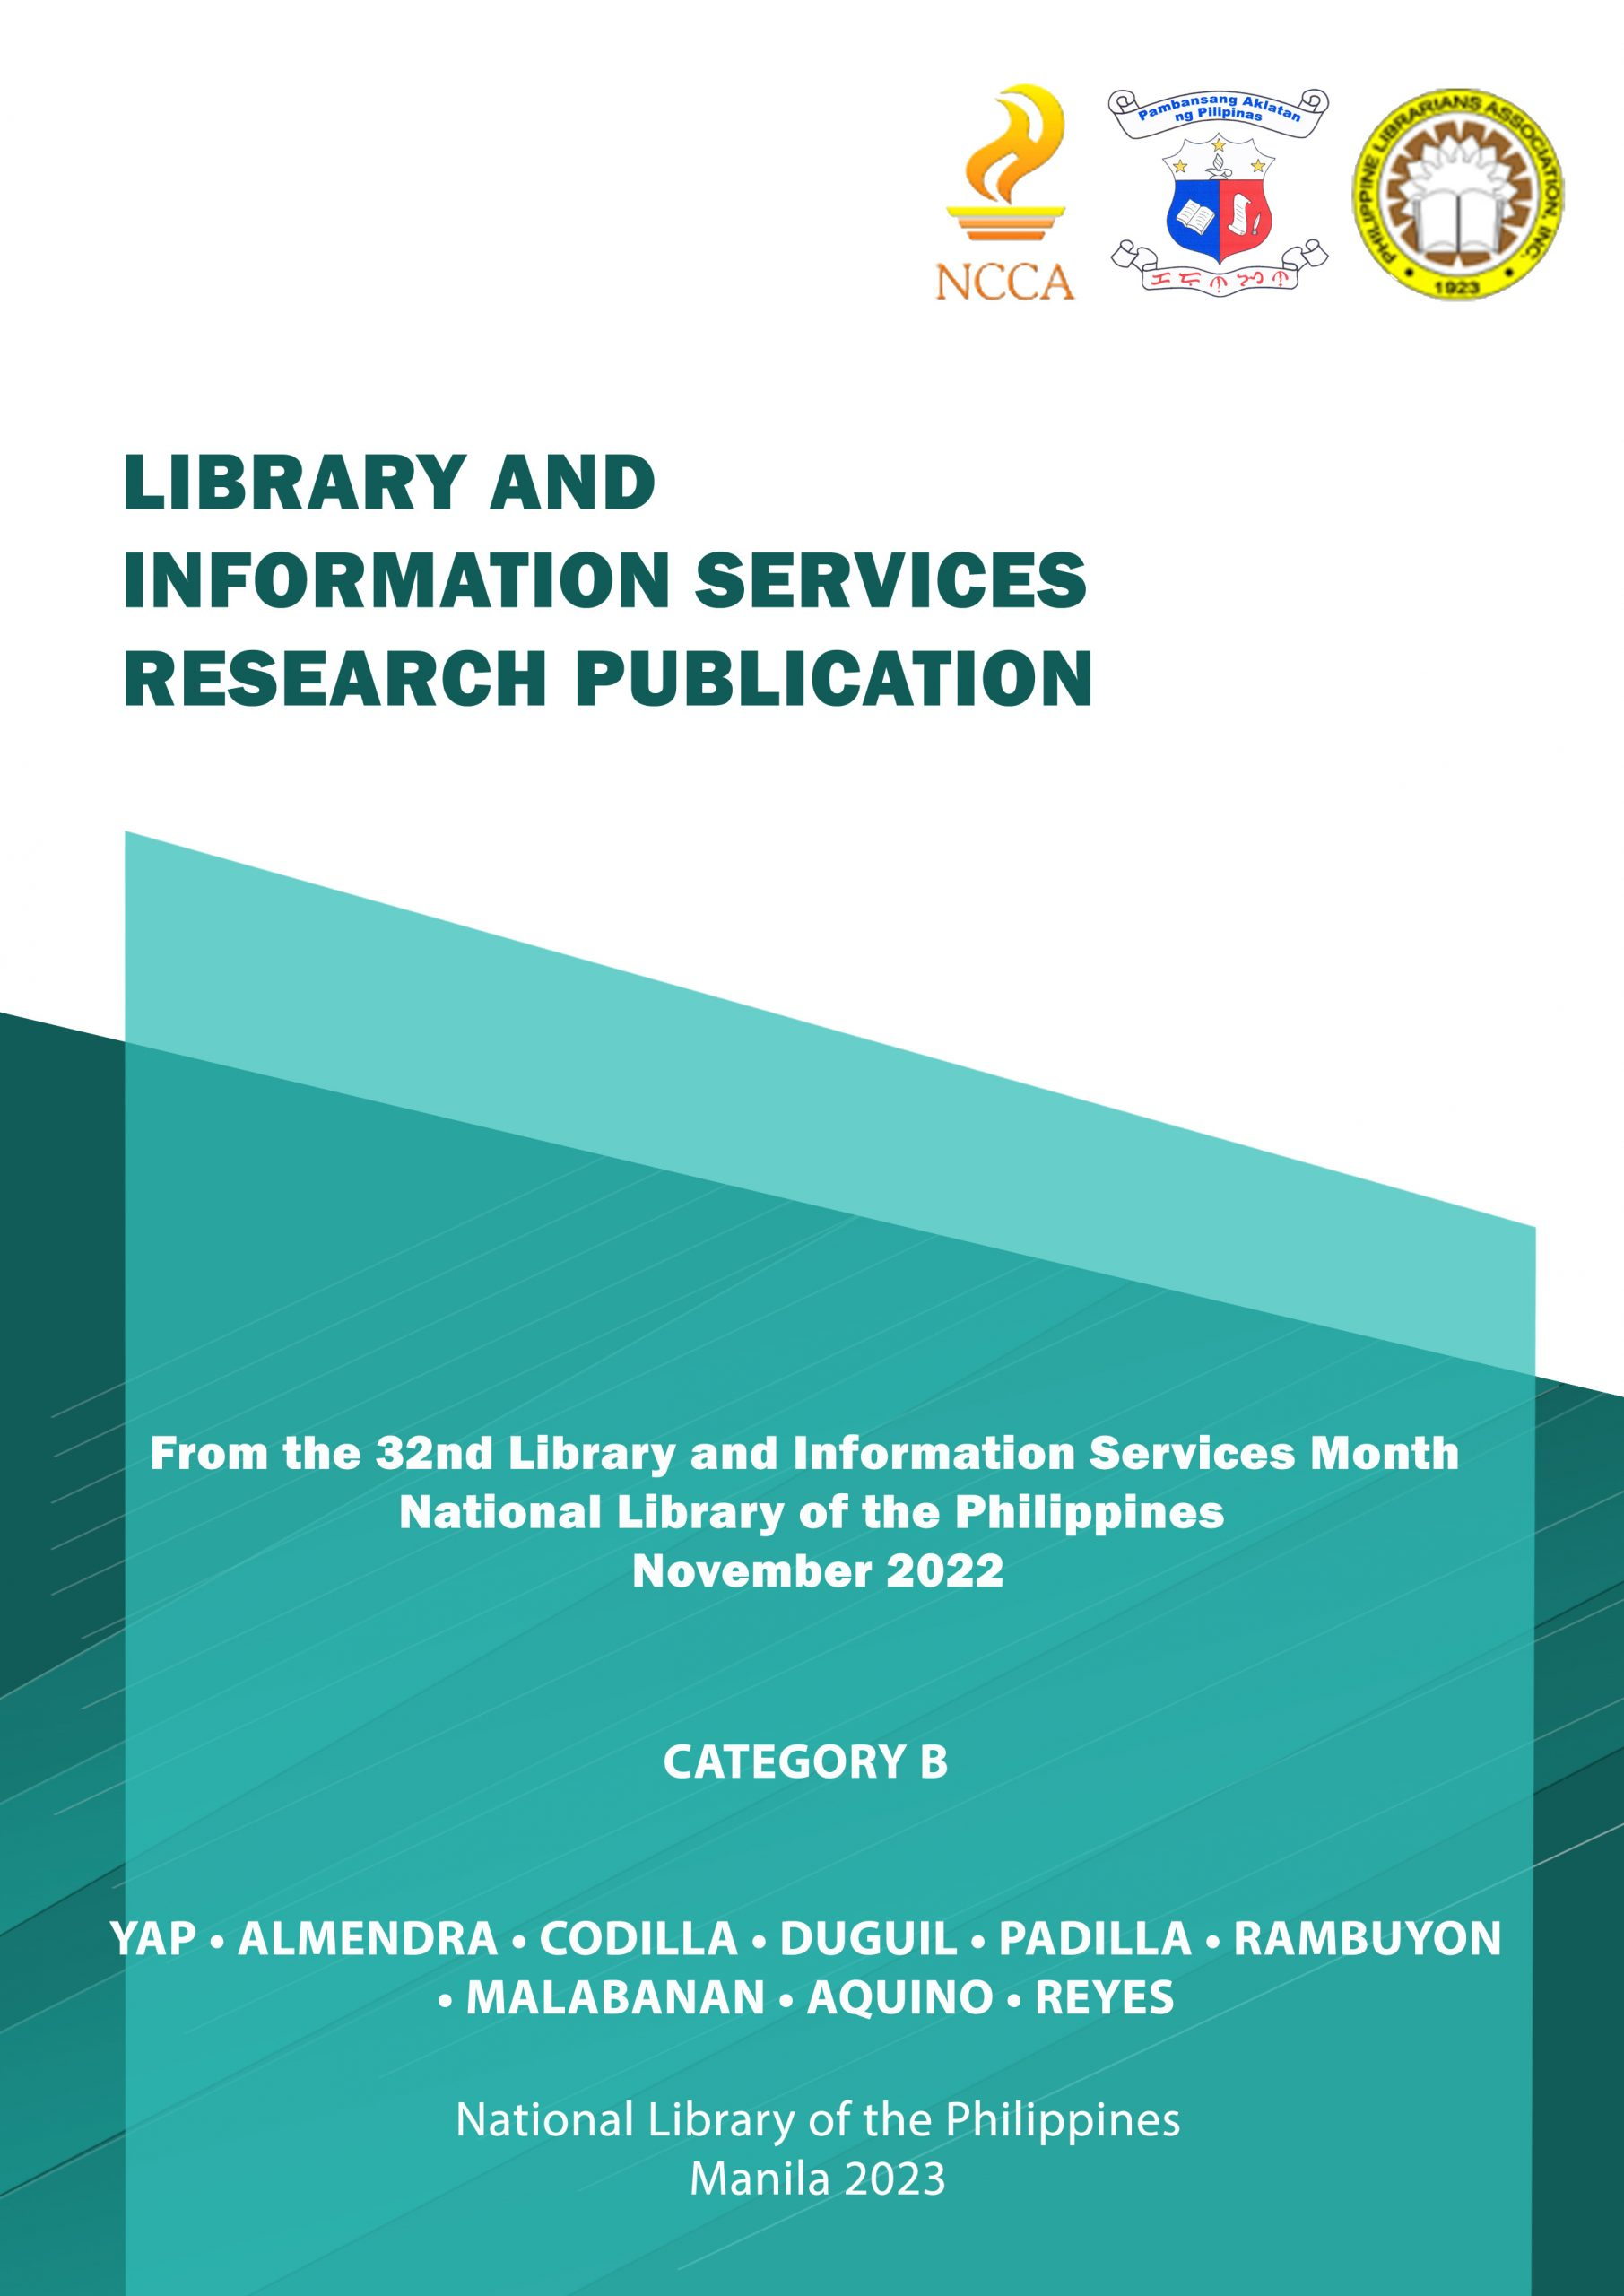 LIBRARY AND INFORMATION SERVICES Front 2 Category B